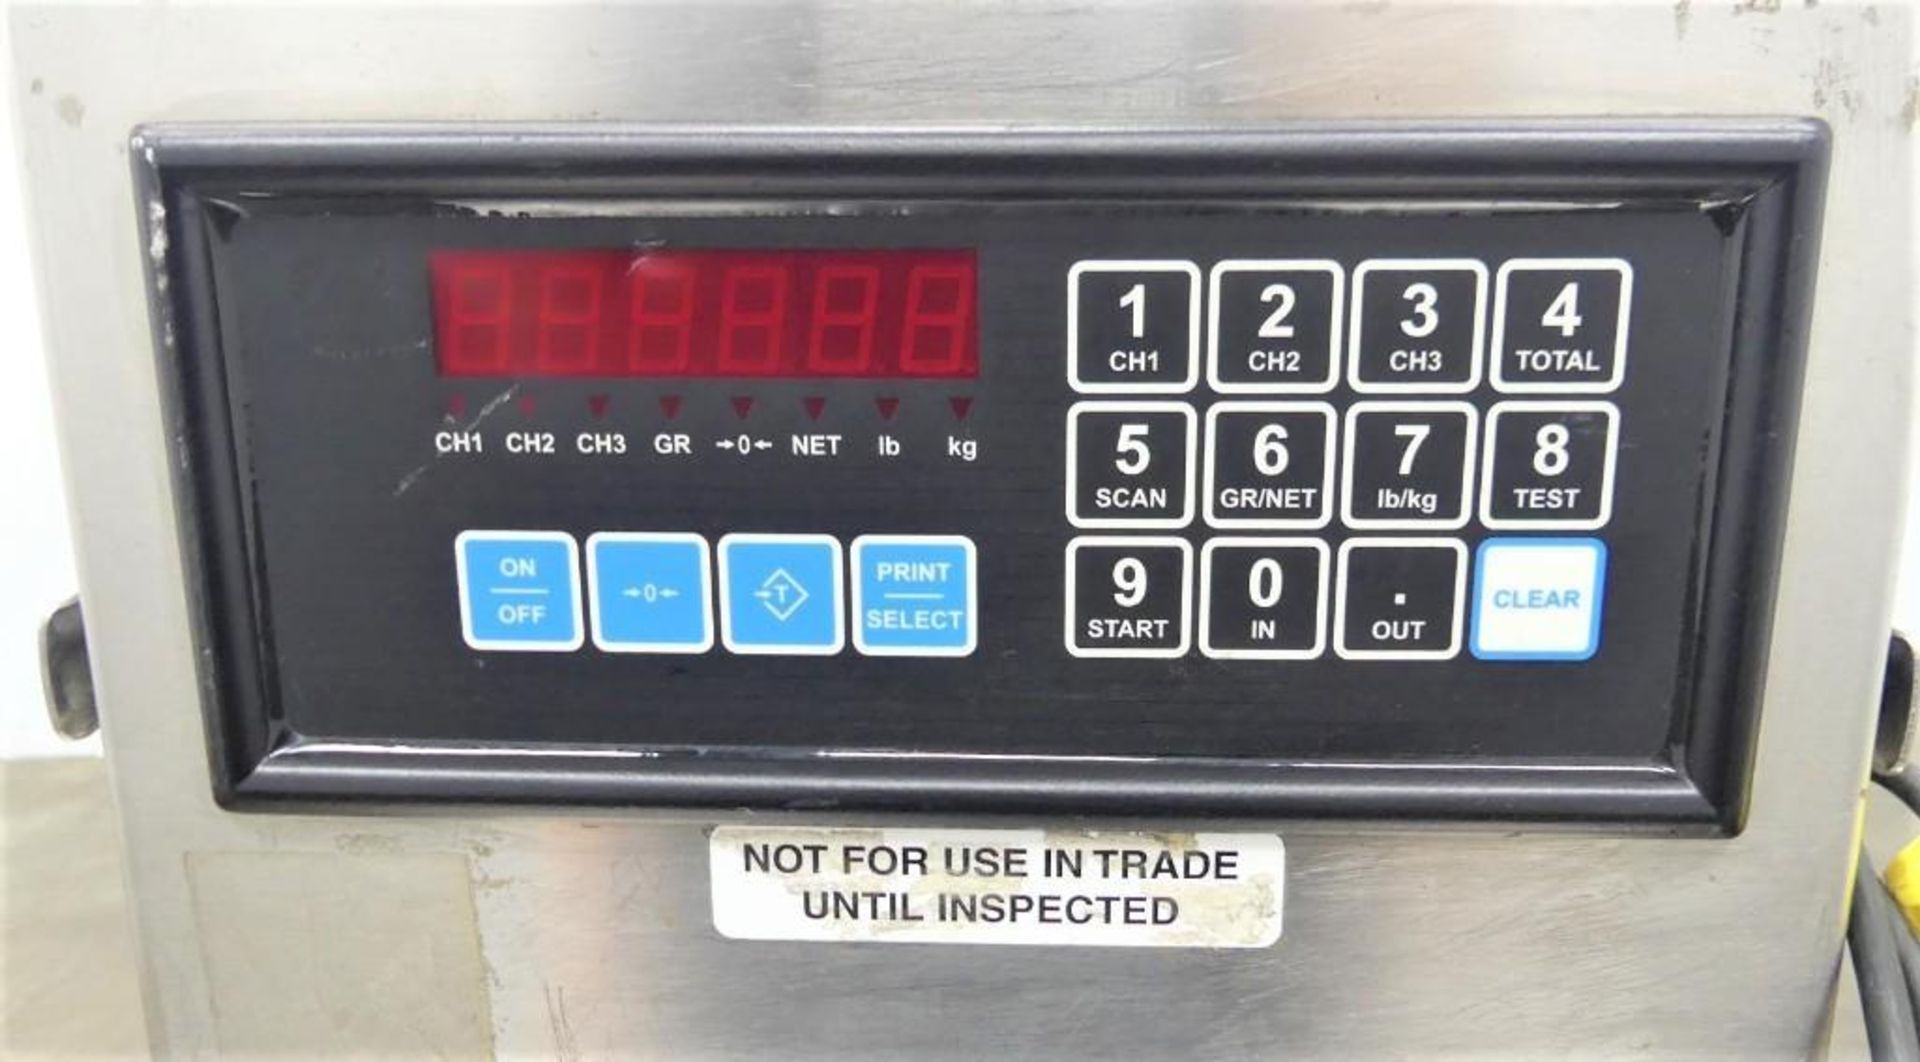 Stainless Scale w 6 Digit Western Scale Indicator - Image 3 of 5